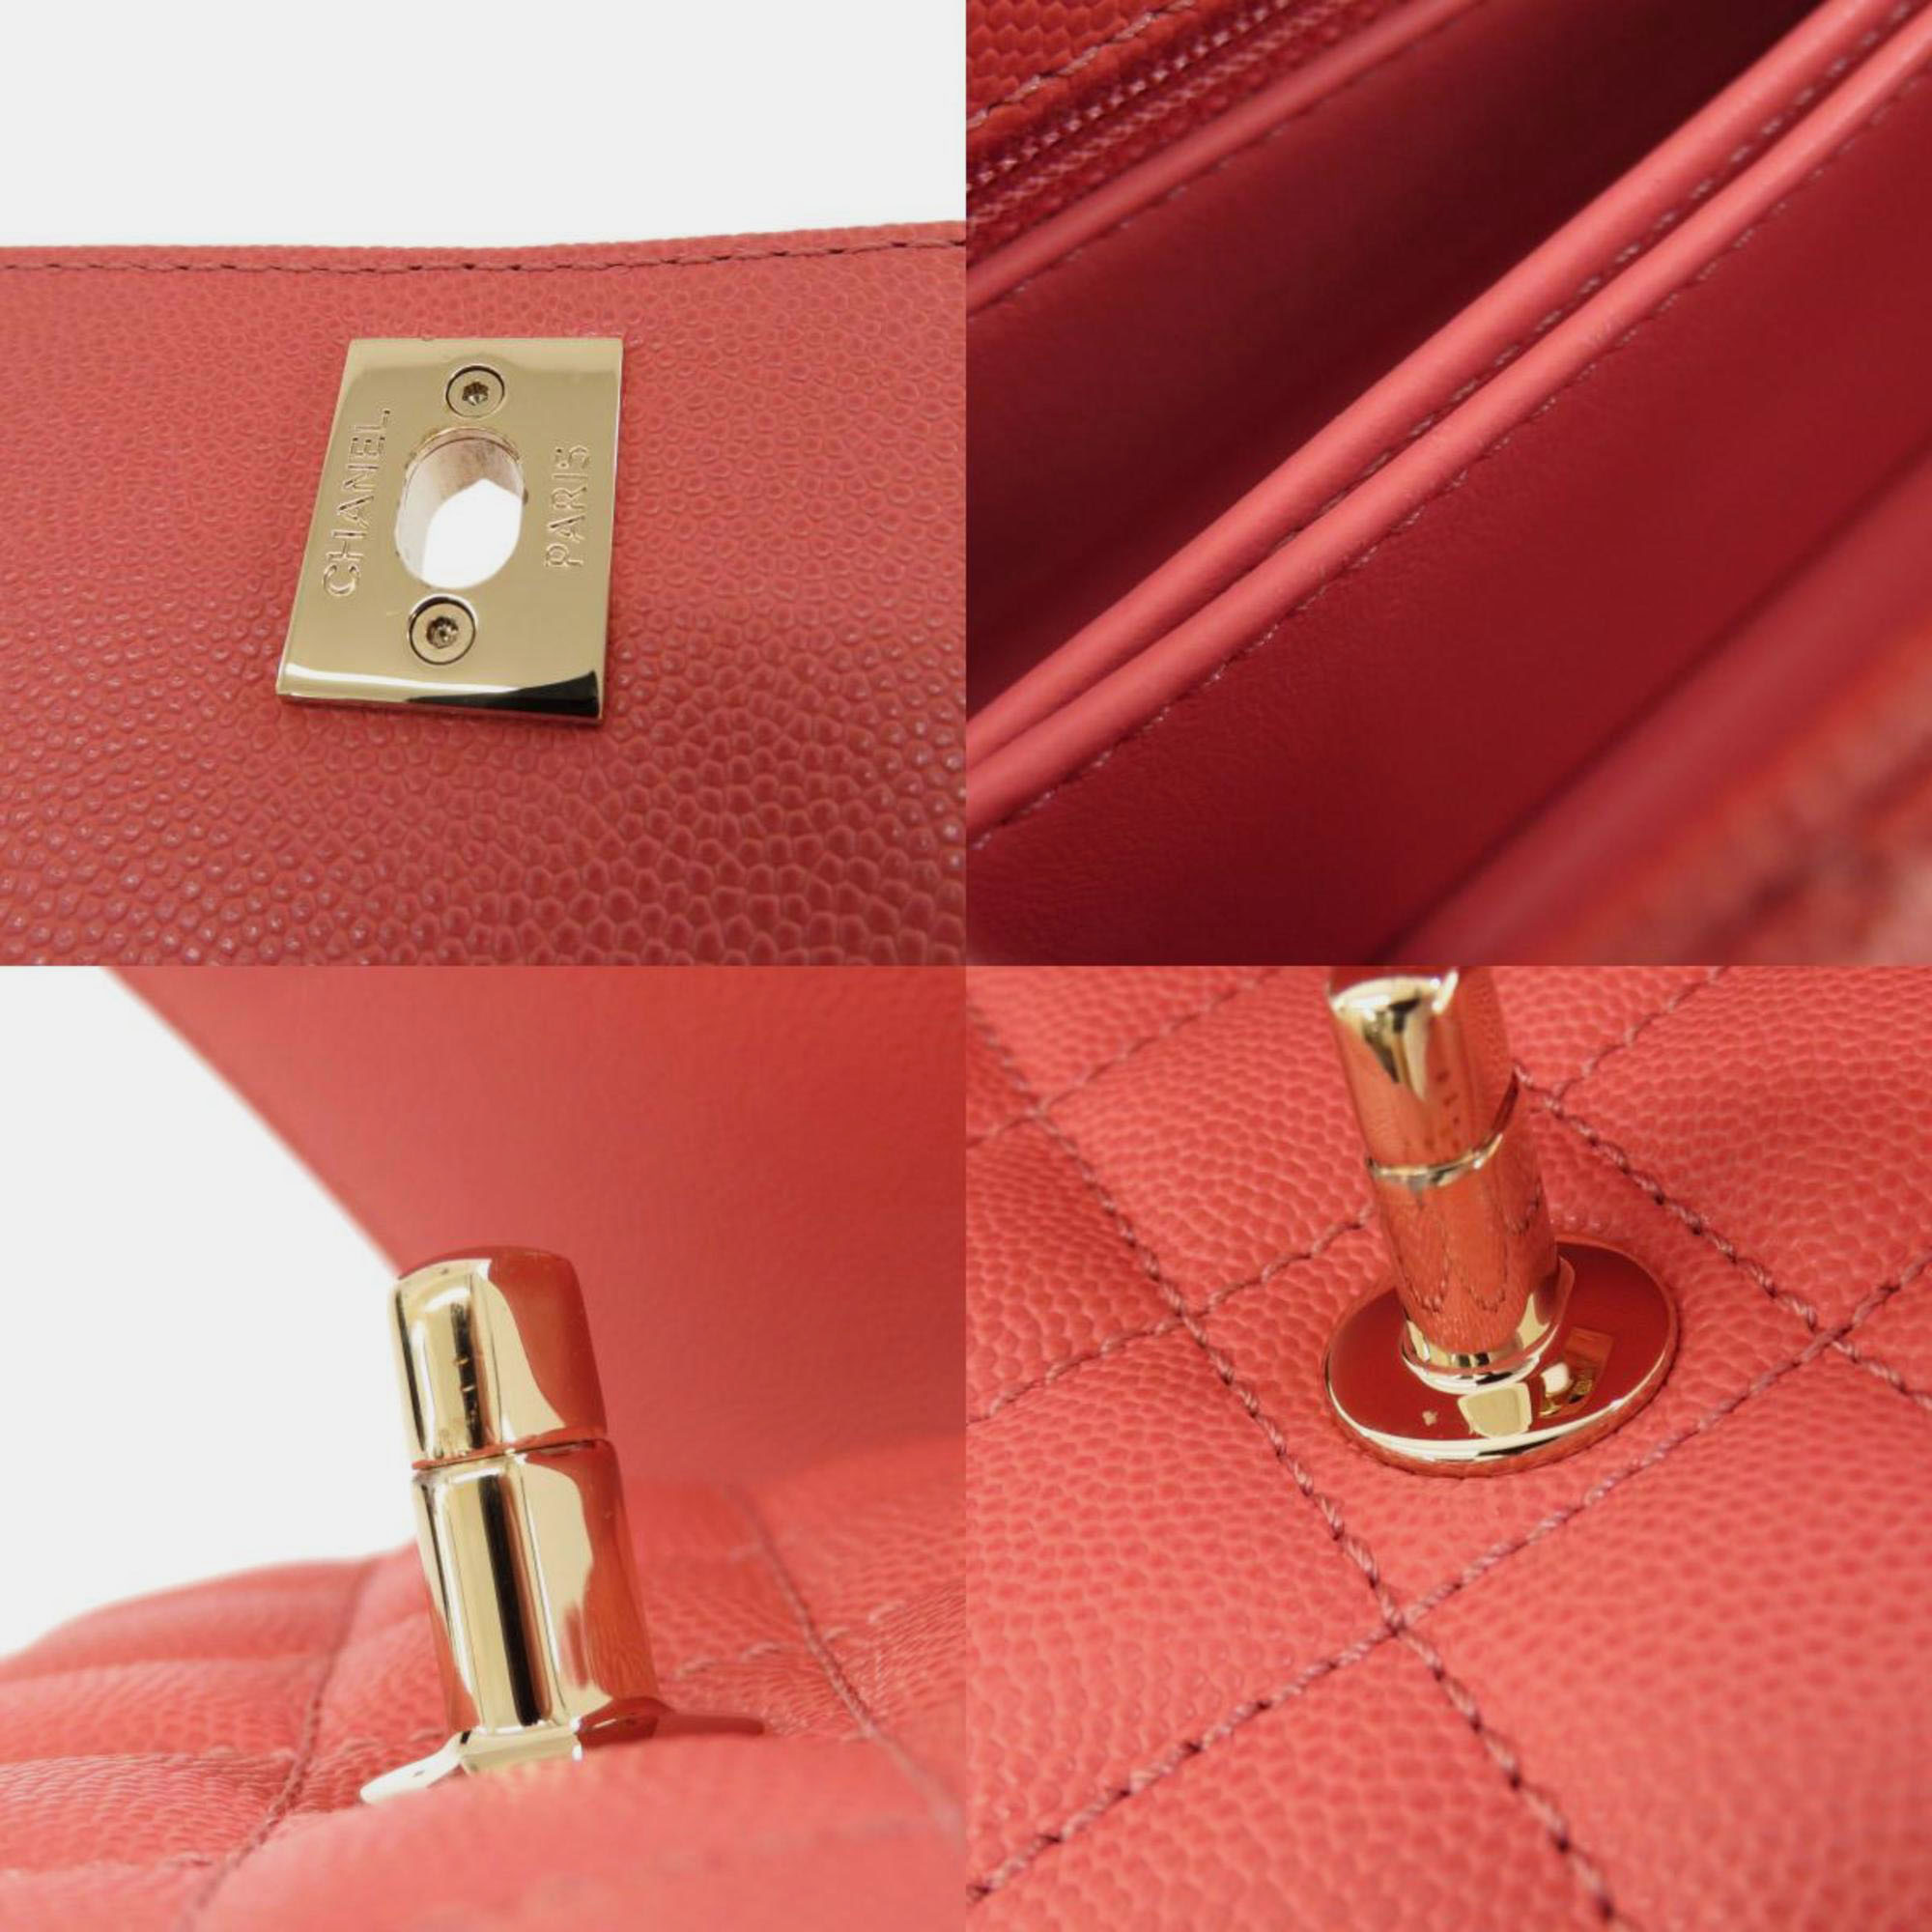 Chanel Pink Leather Caviar Twilly Coco Top Handle Bag